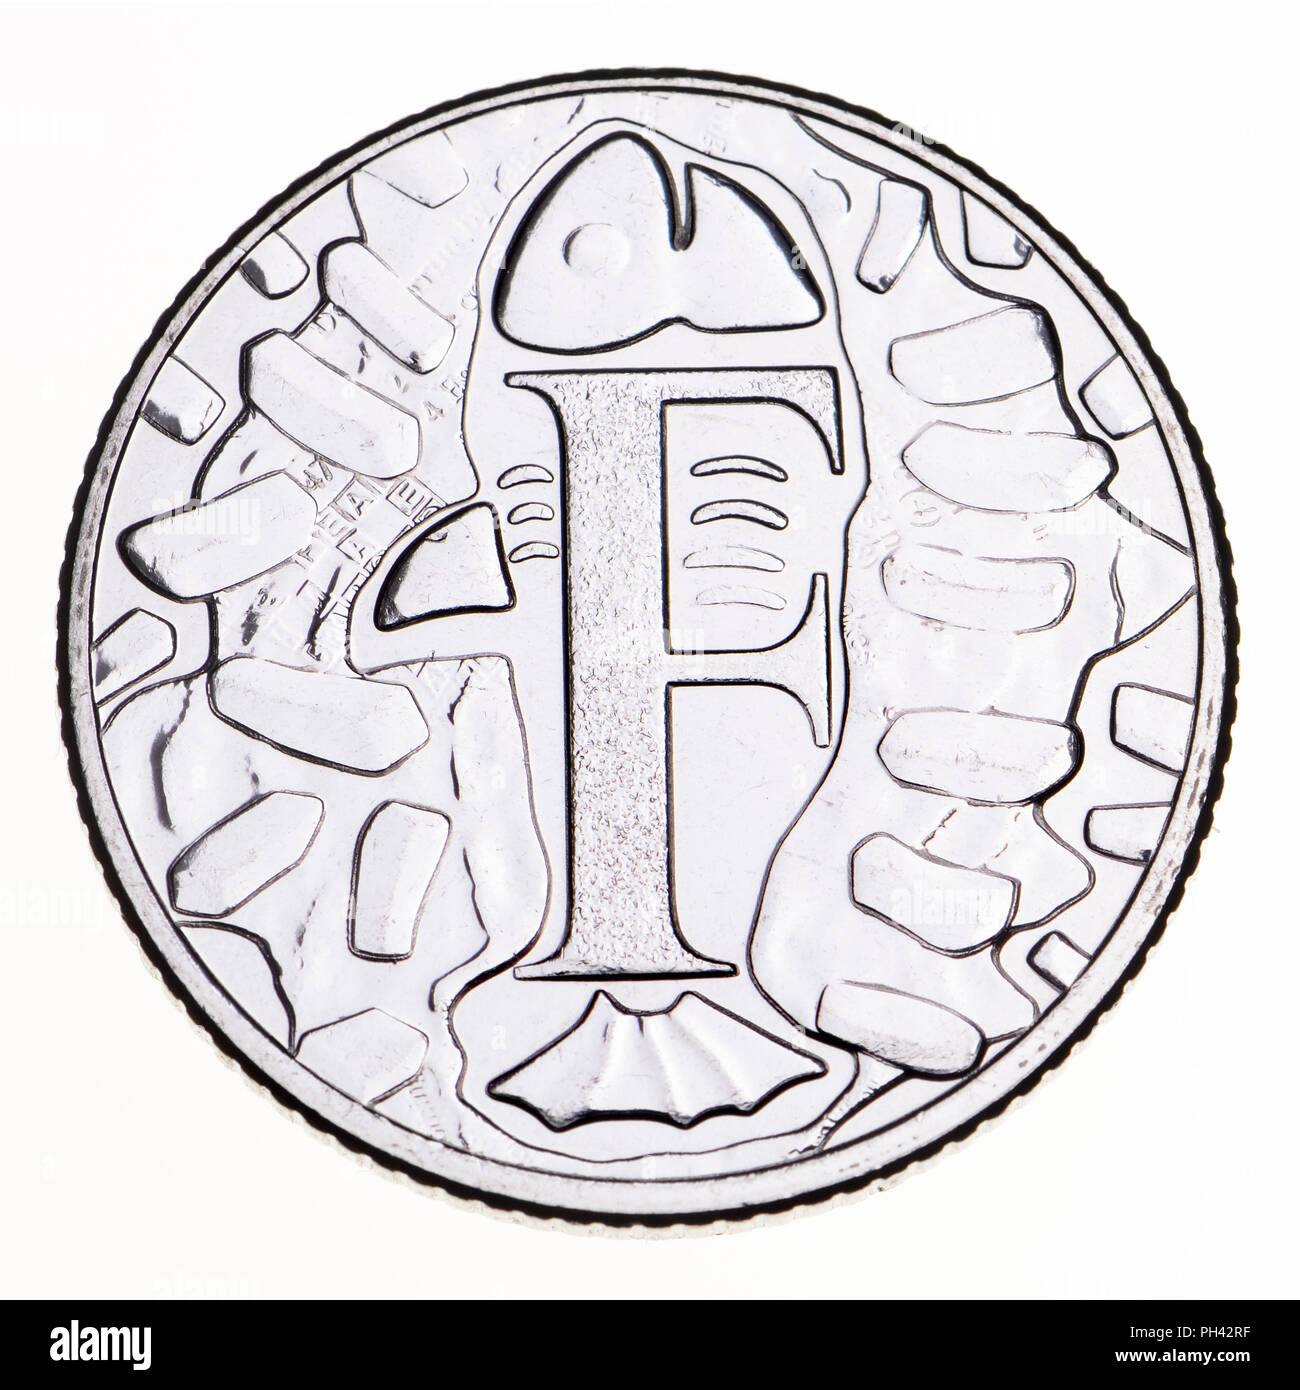 British 10p coin (reverse) from 2018 'Alphabet' series, celebrating Britishness. F - fish and chips Stock Photo